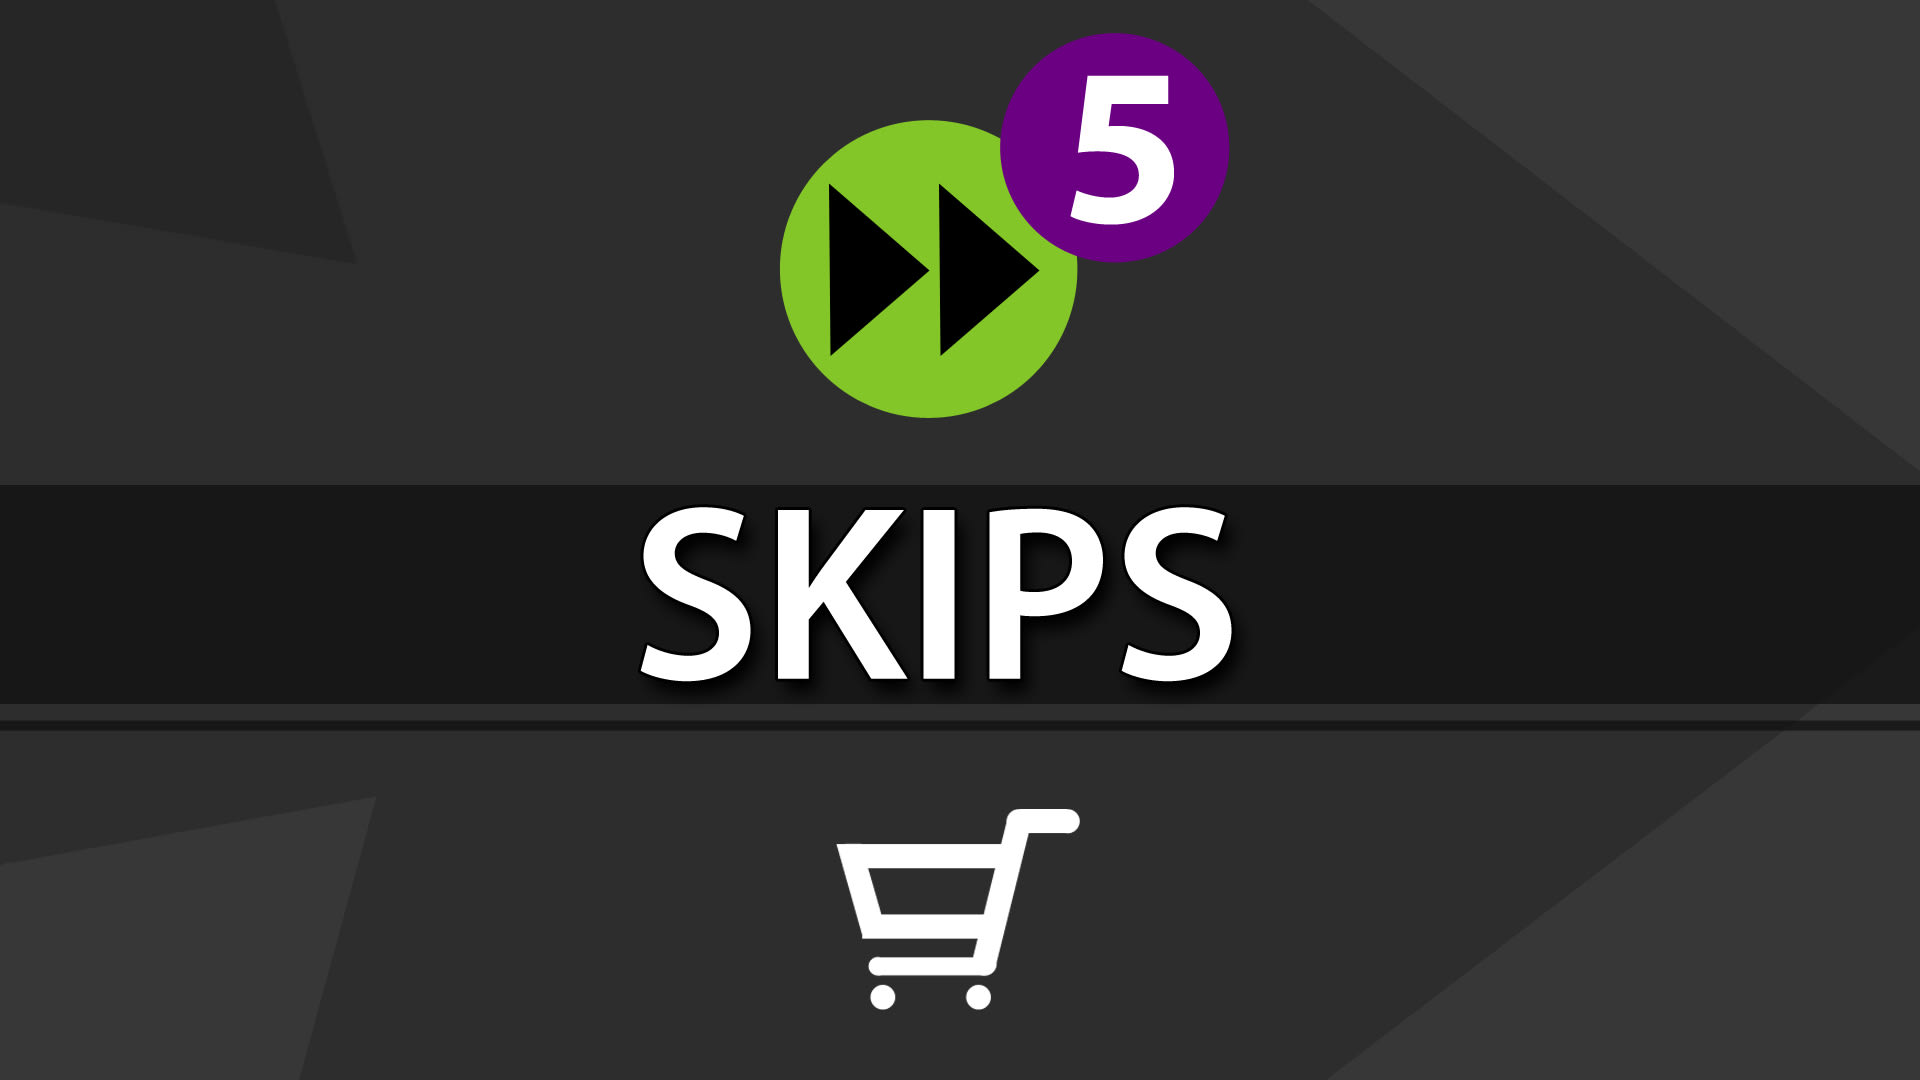 Add 5 more skips for each mode